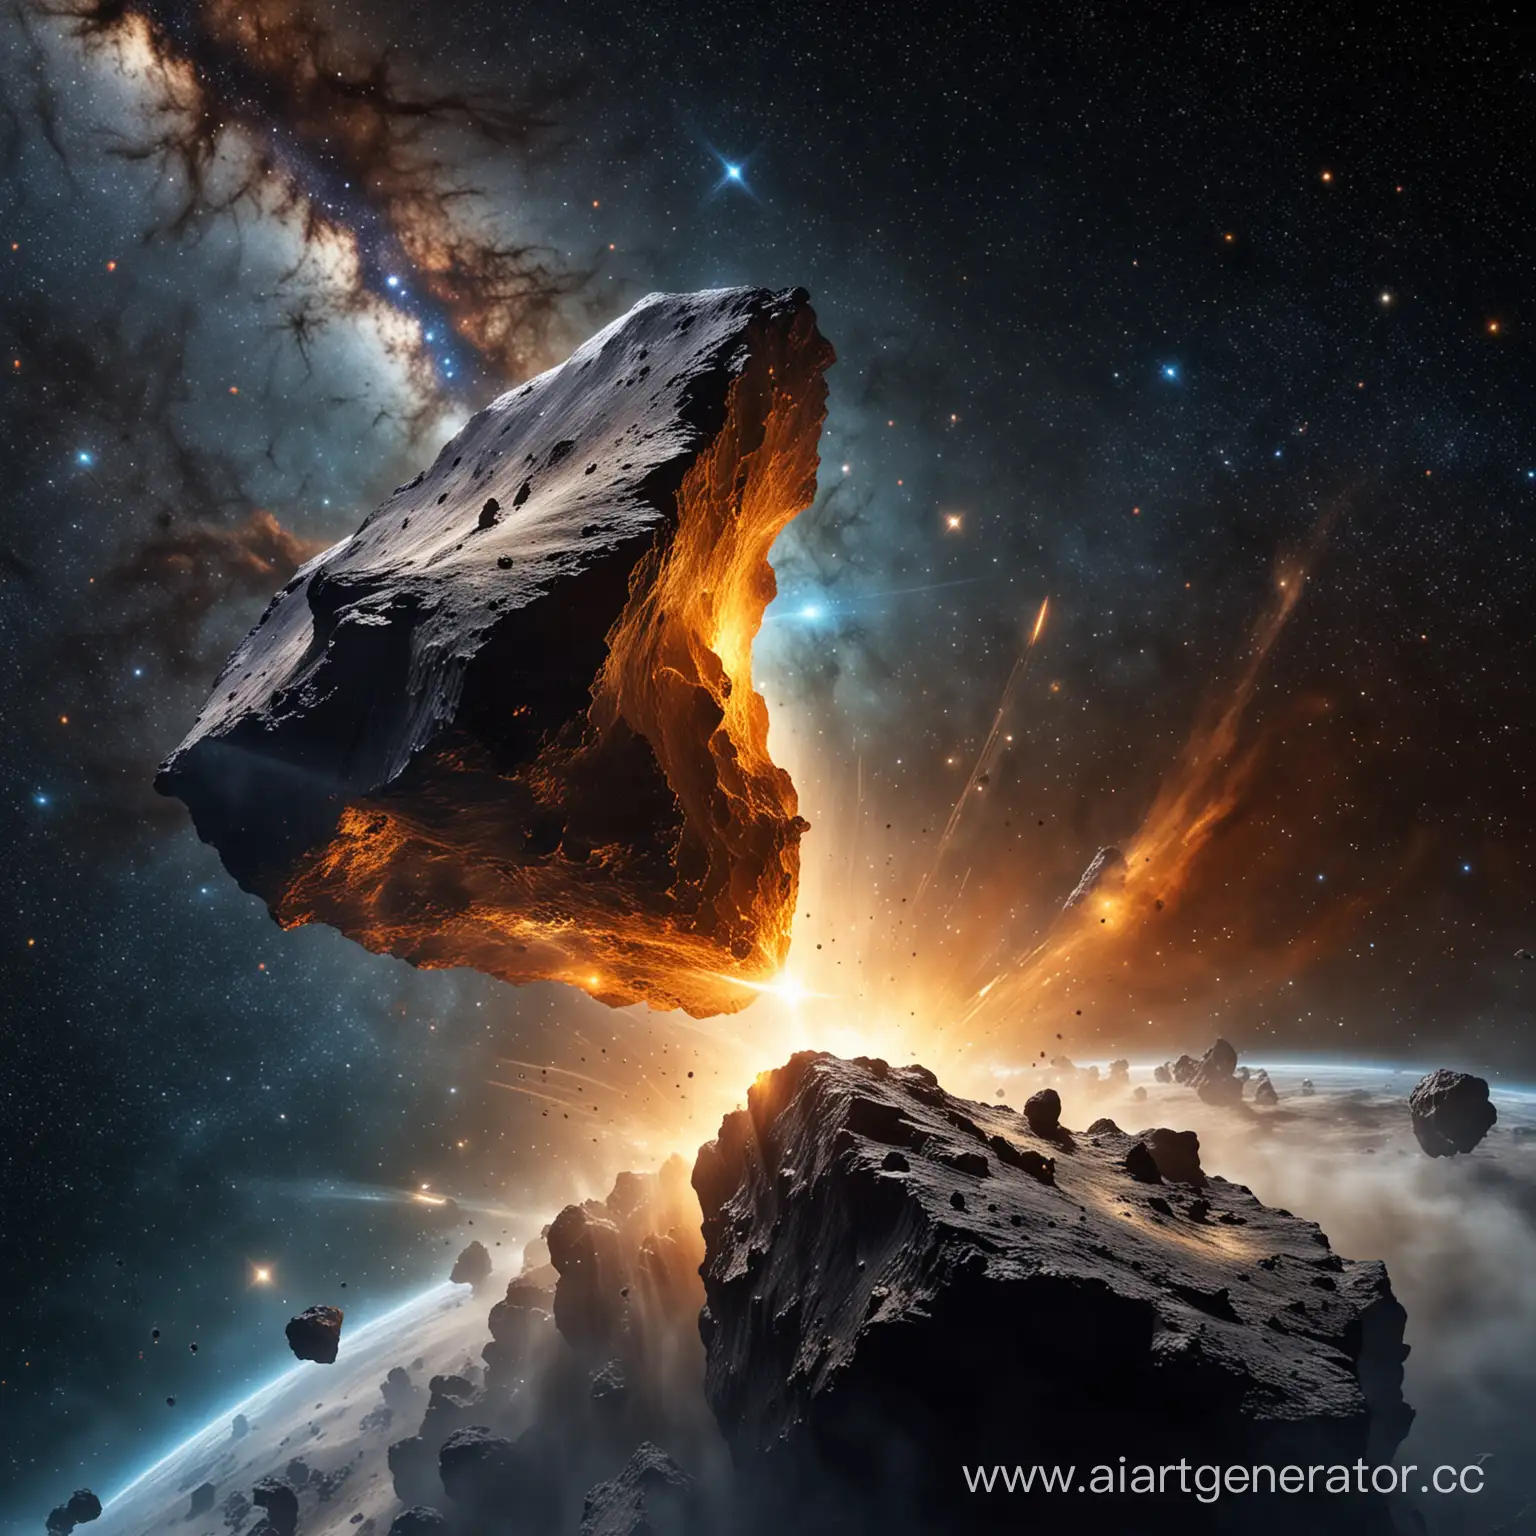 Golden-Asteroid-Soaring-Through-a-NebulaStudded-Space